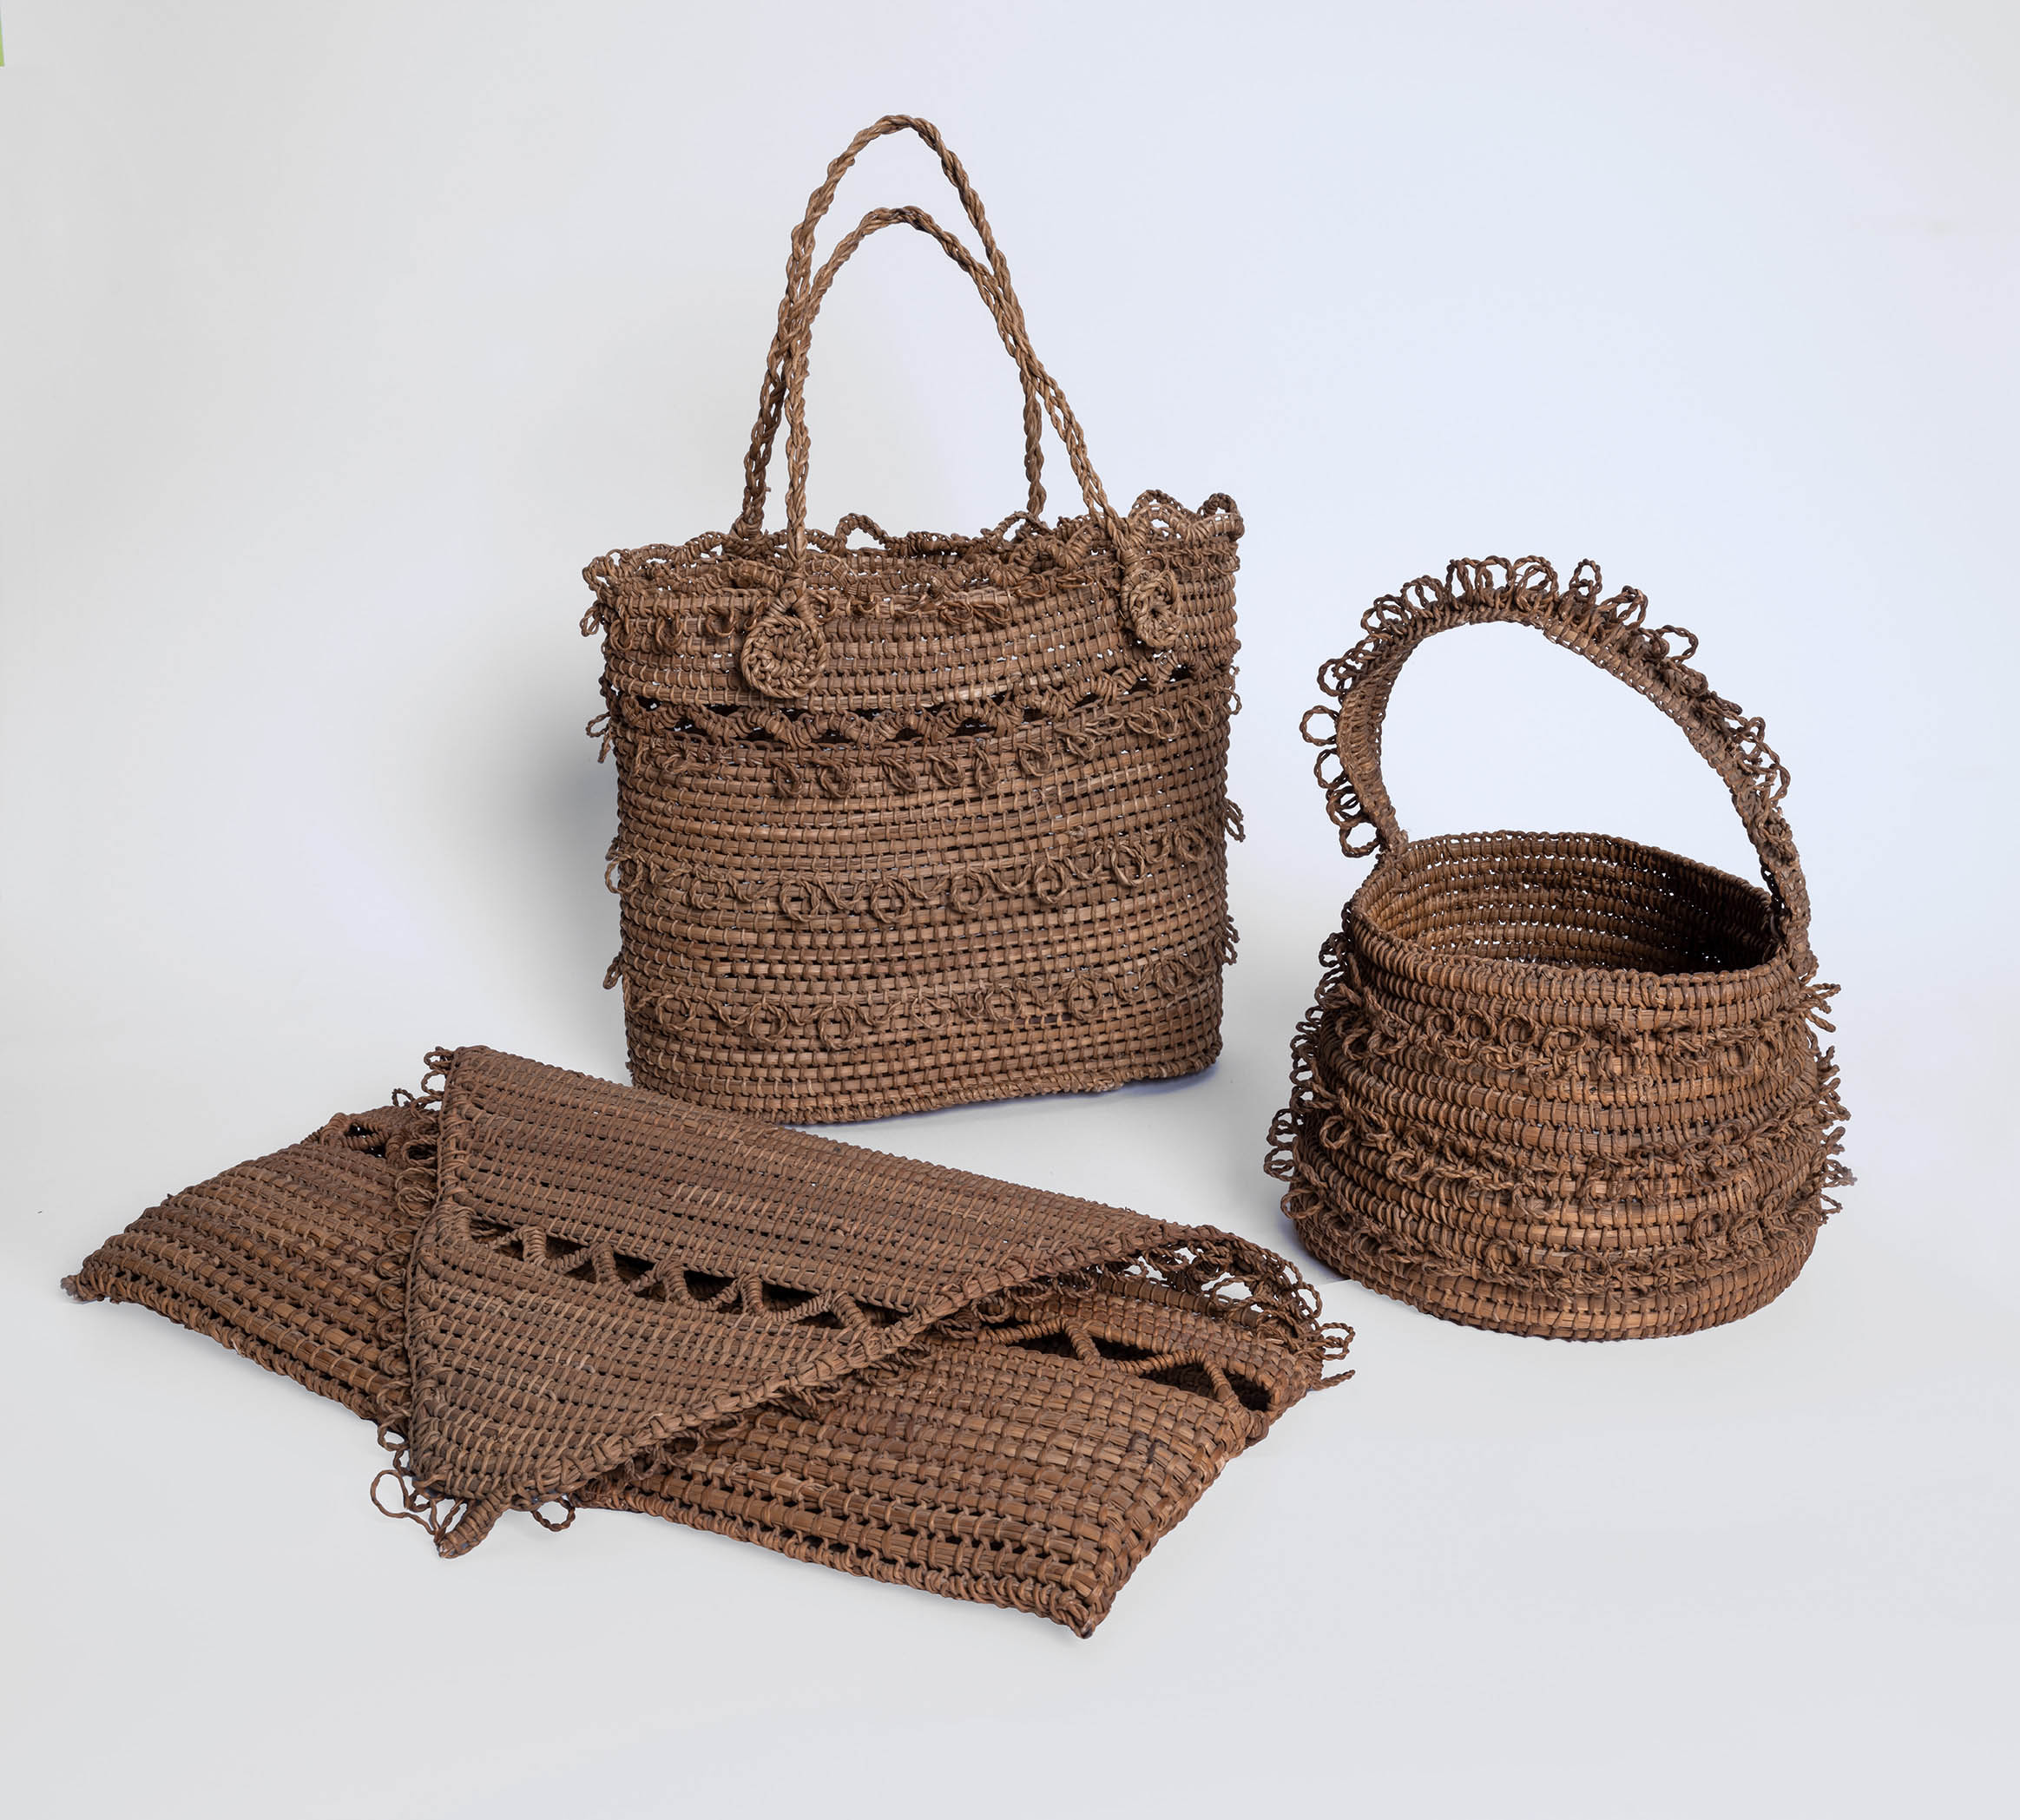 Woven baskets attributed to Nuningah (Rose Martin), colledted from Myora Missions c.1917, UQ Anthropology Museum collection